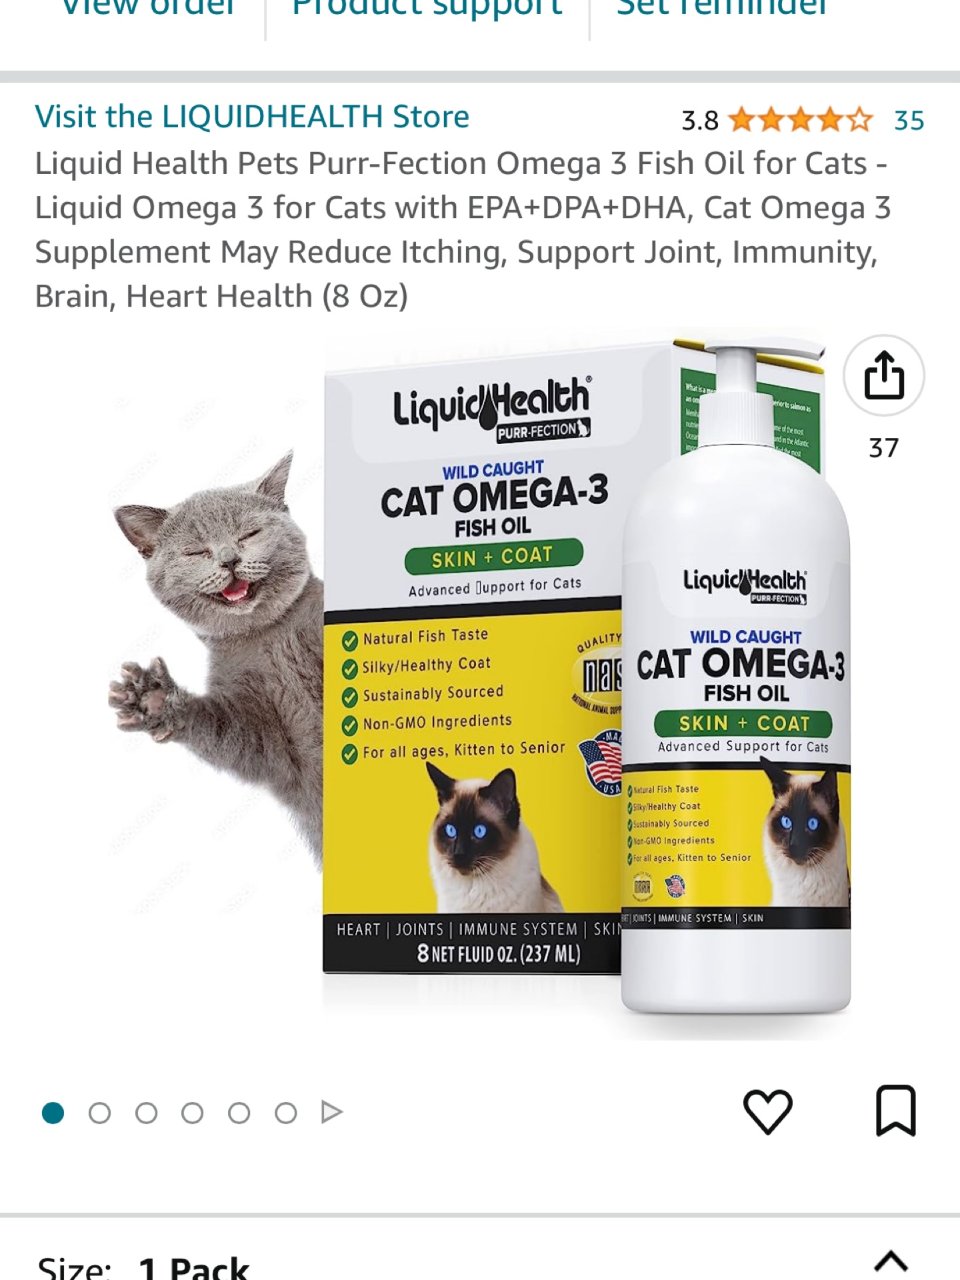 Liquid Health Pets Purr-Fection Omega 3 Fish Oil for Cats - Liquid Omega 3 for Cats with EPA+DPA+DHA, Cat Omega 3 Supplement May Reduce Itching, Support Joint, Immunity, Brain, Heart Health (8 Oz) : Pet Supplies